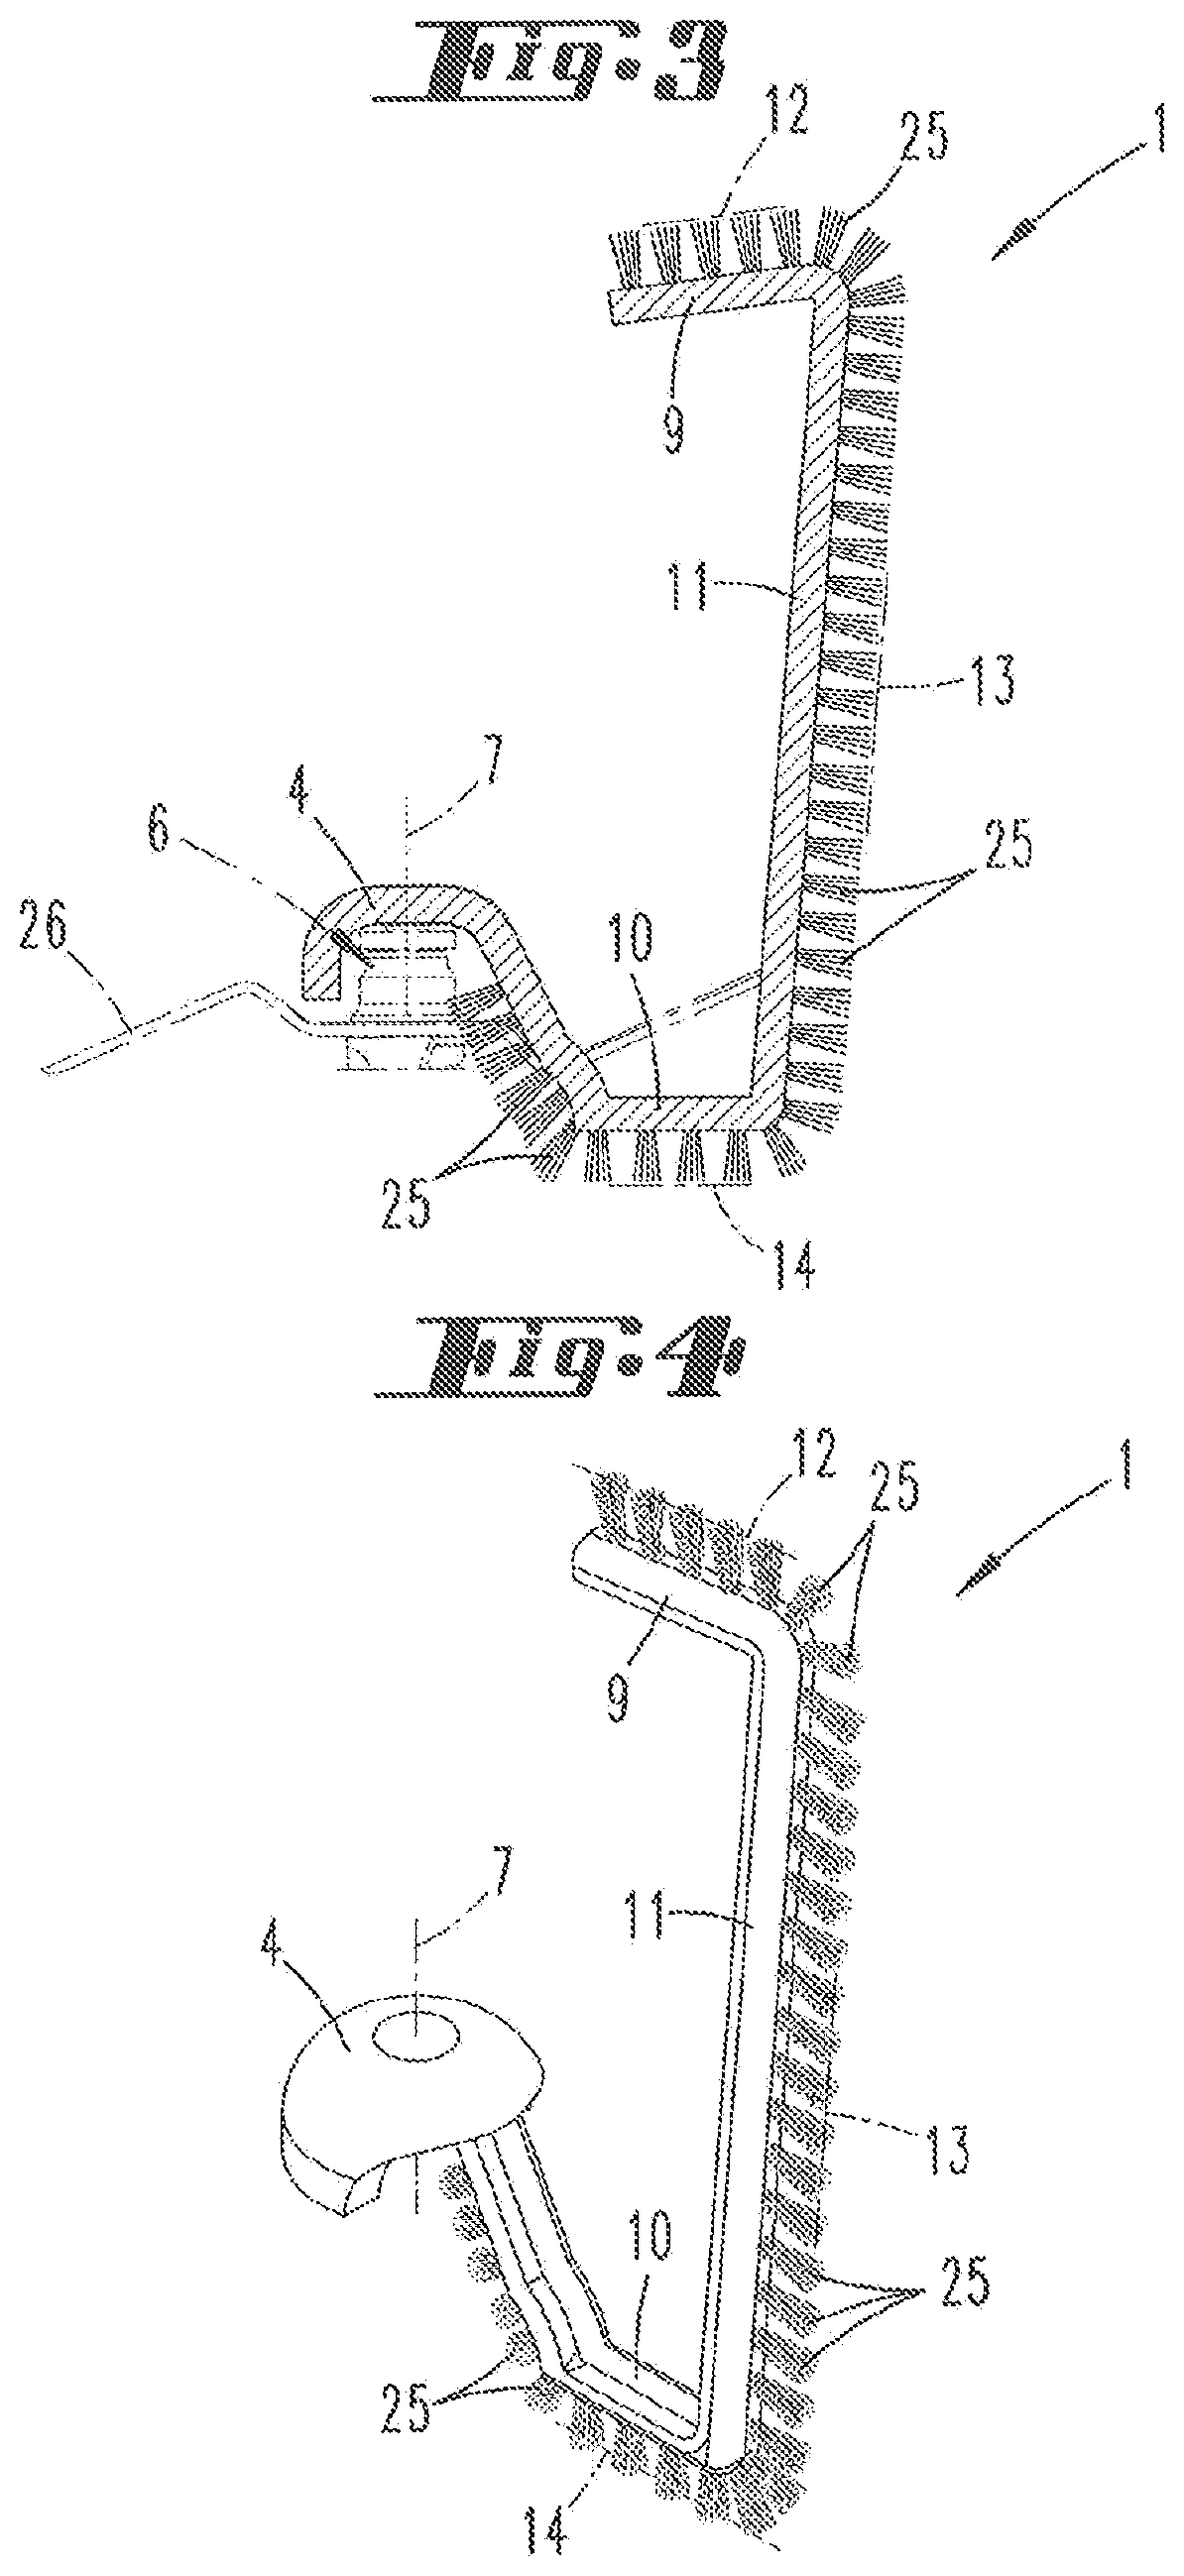 Cleaning device for a mixing vessel of a food processor operated by an electric motor